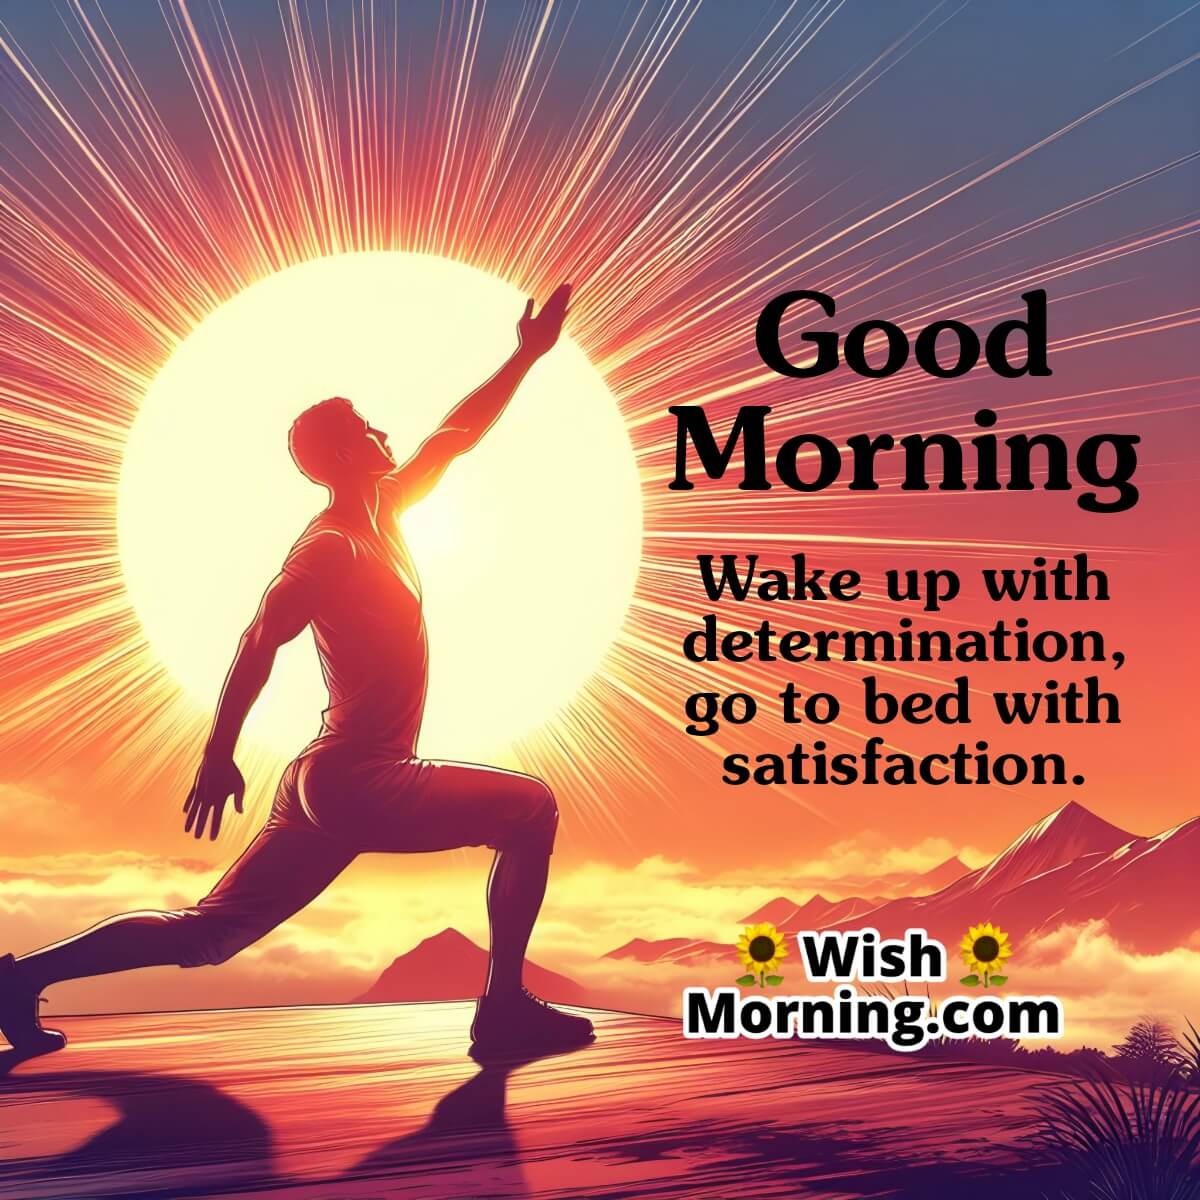 Good Morning Exercise Quotes - Wish Morning